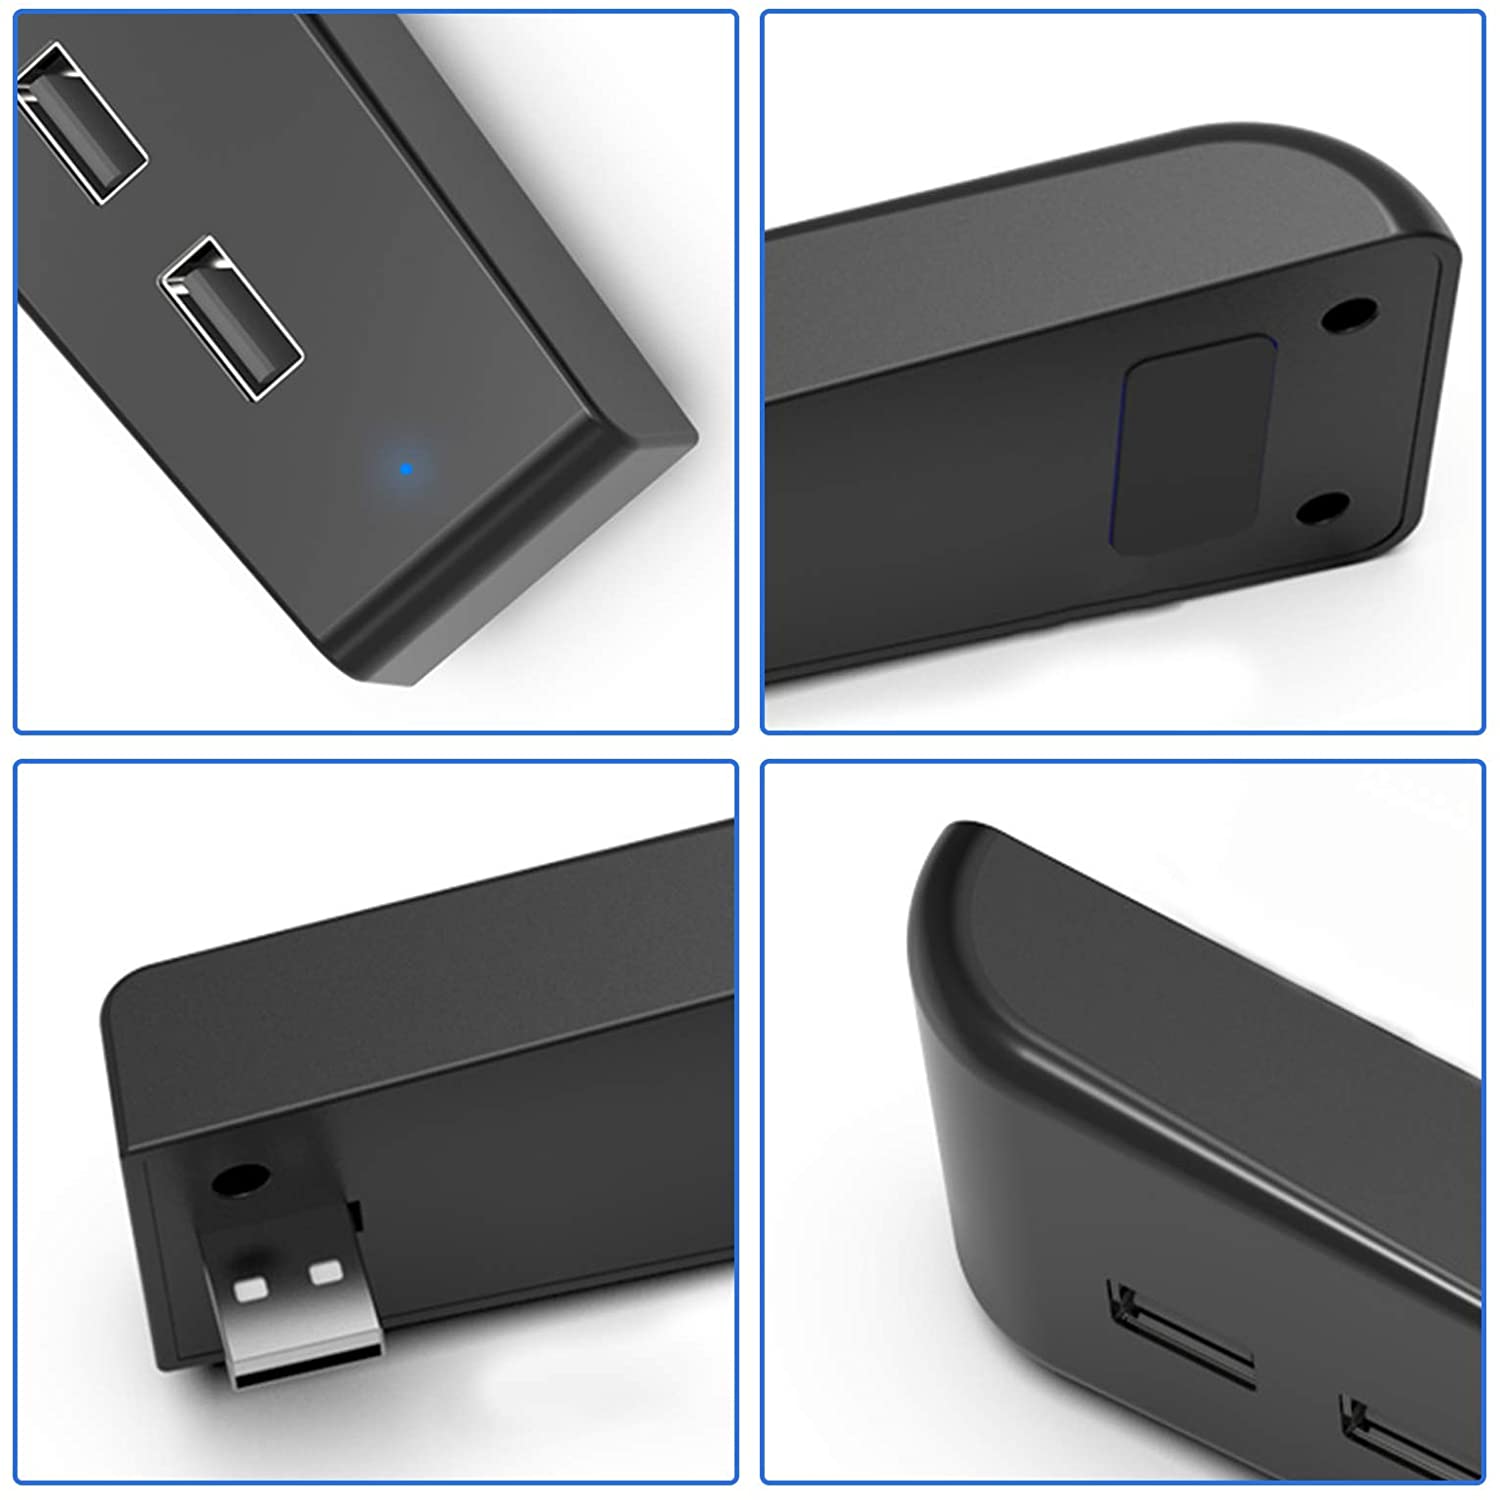 Exquisite USB interface with silicone pad design, smooth ports, and sleek lines for easy use and protection